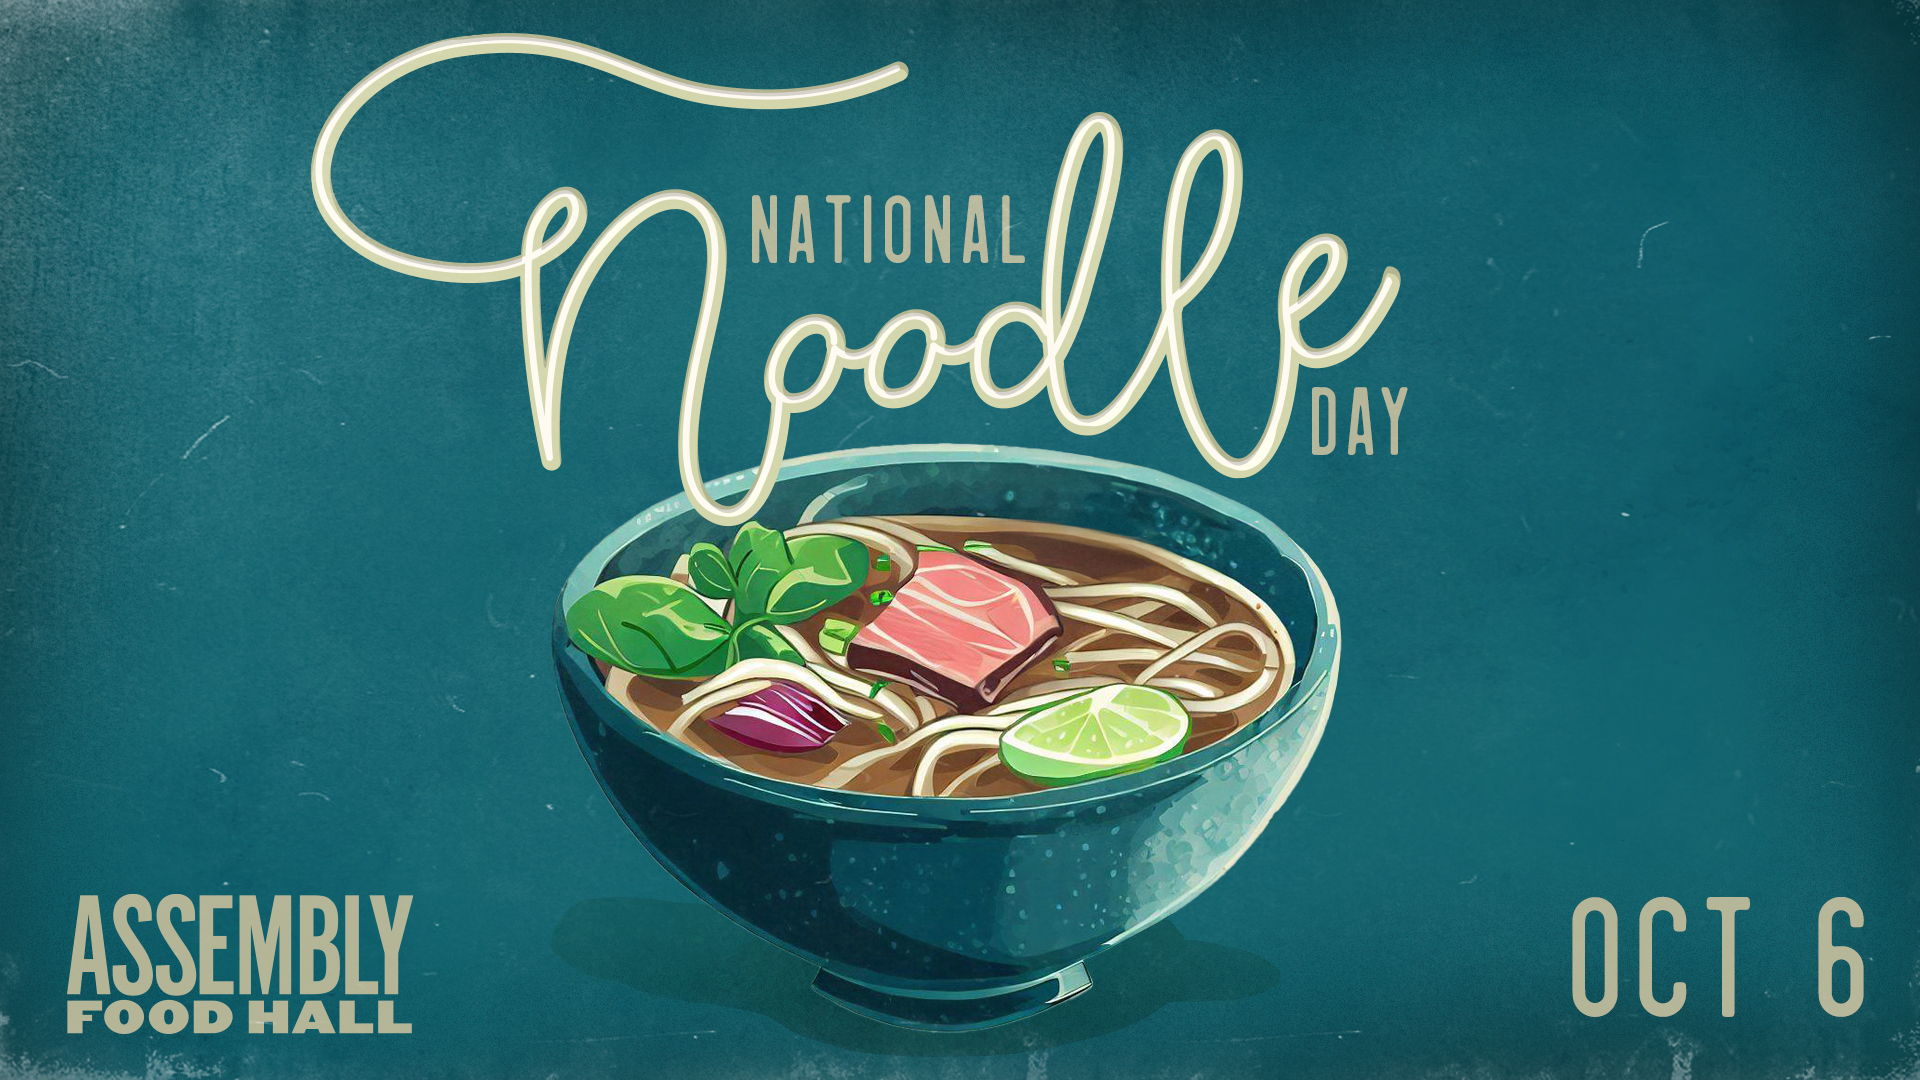 Promo image of National Noodle Day